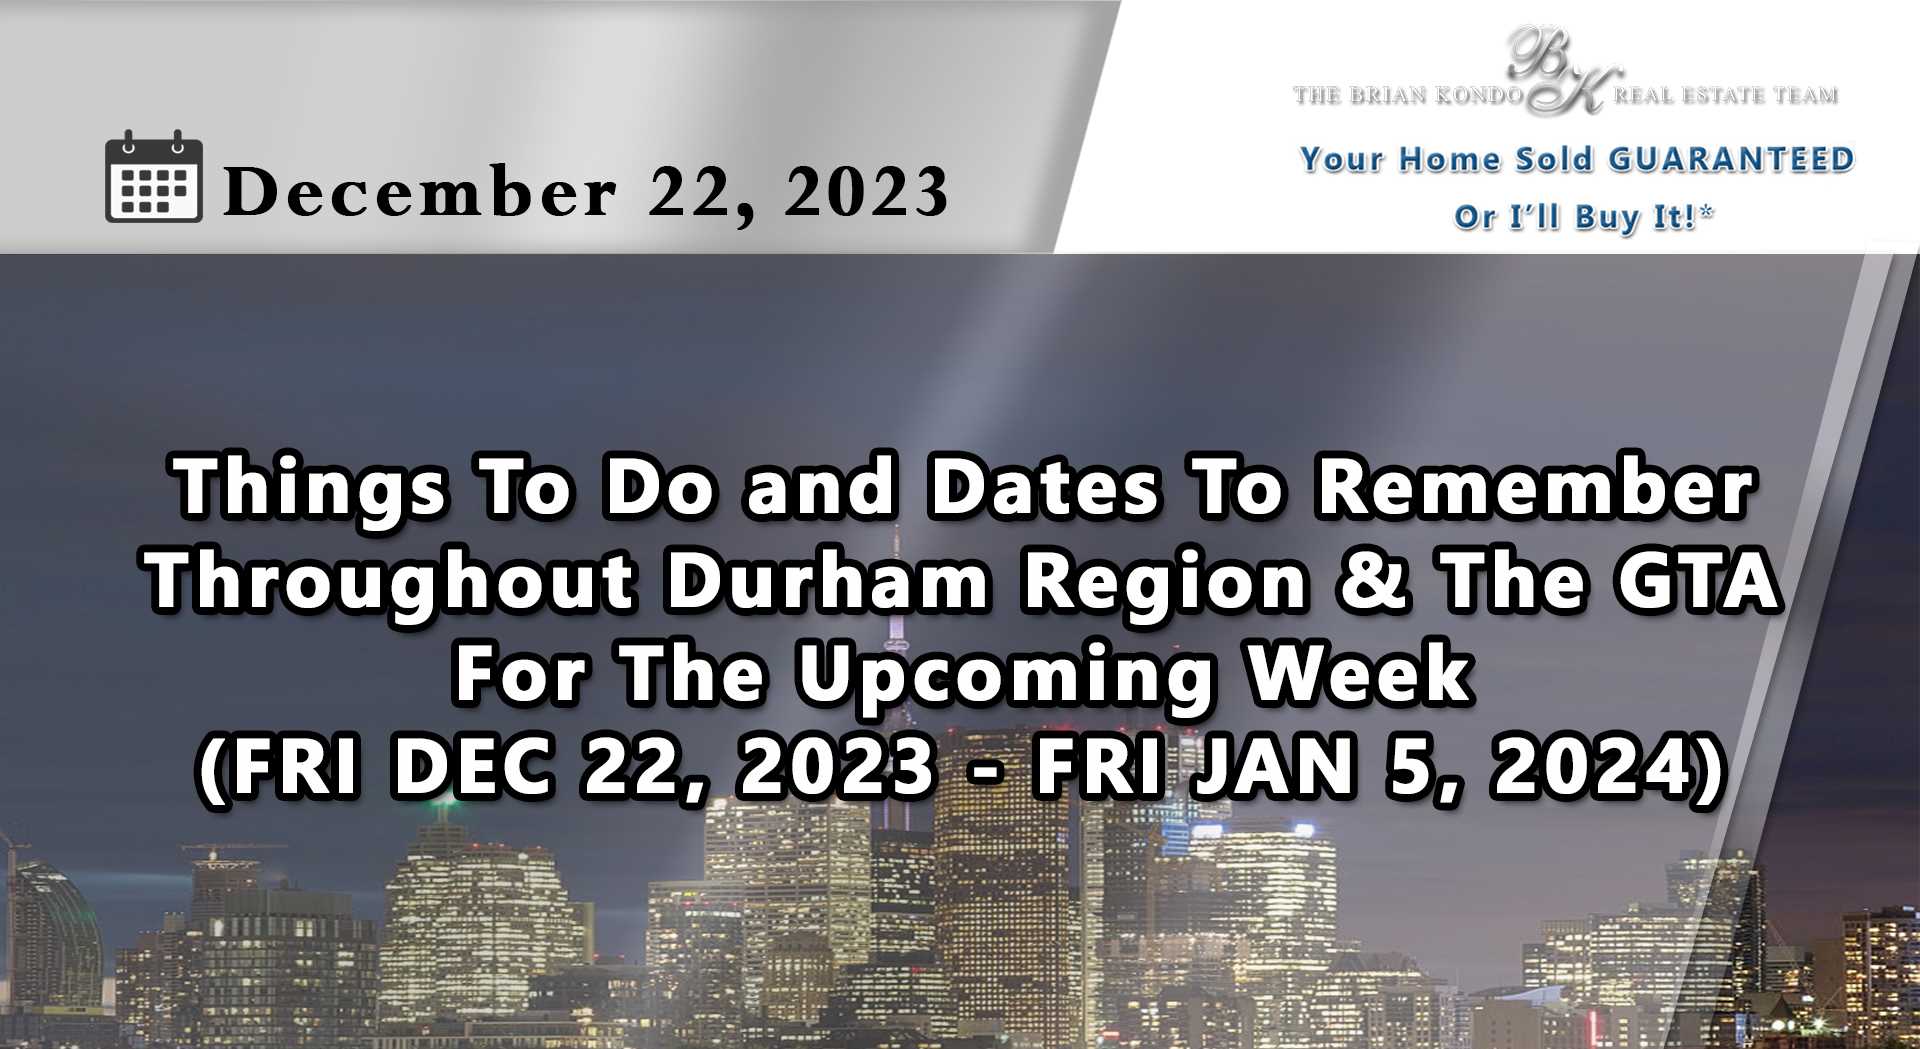 Things To Do and Dates To Remember Throughout Durham Region and The GTA For The Upcoming 2 Weeks (FRI DEC 22, 2023 - FRI JAN 05, 2024)